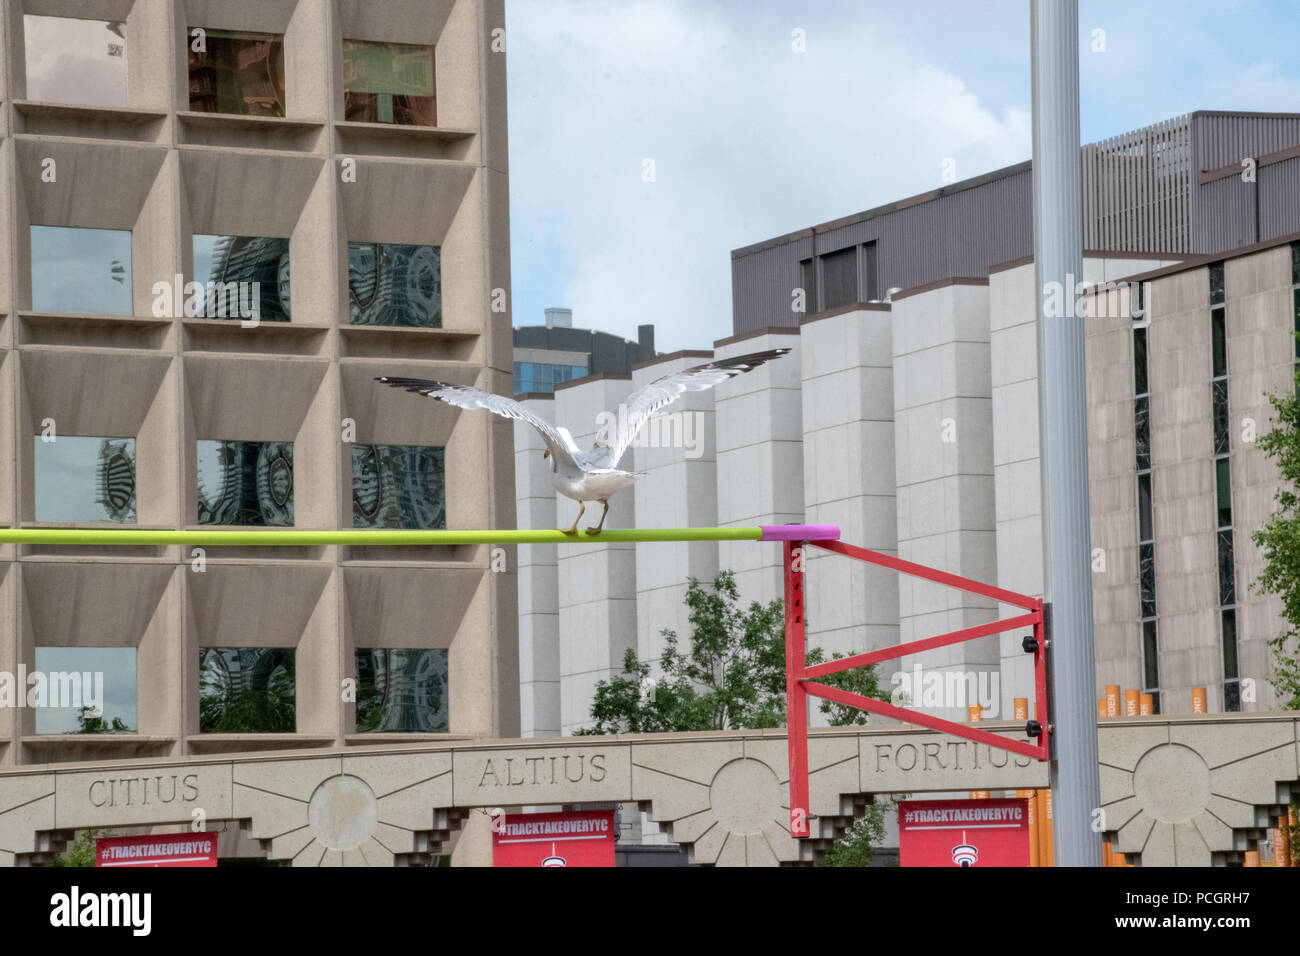 A Seagull disrupts the pole vault competition by landing on the pole vault bar during the June 23, 2018 Track Takeover, Olympic Plaza, Calgary. Stock Photo